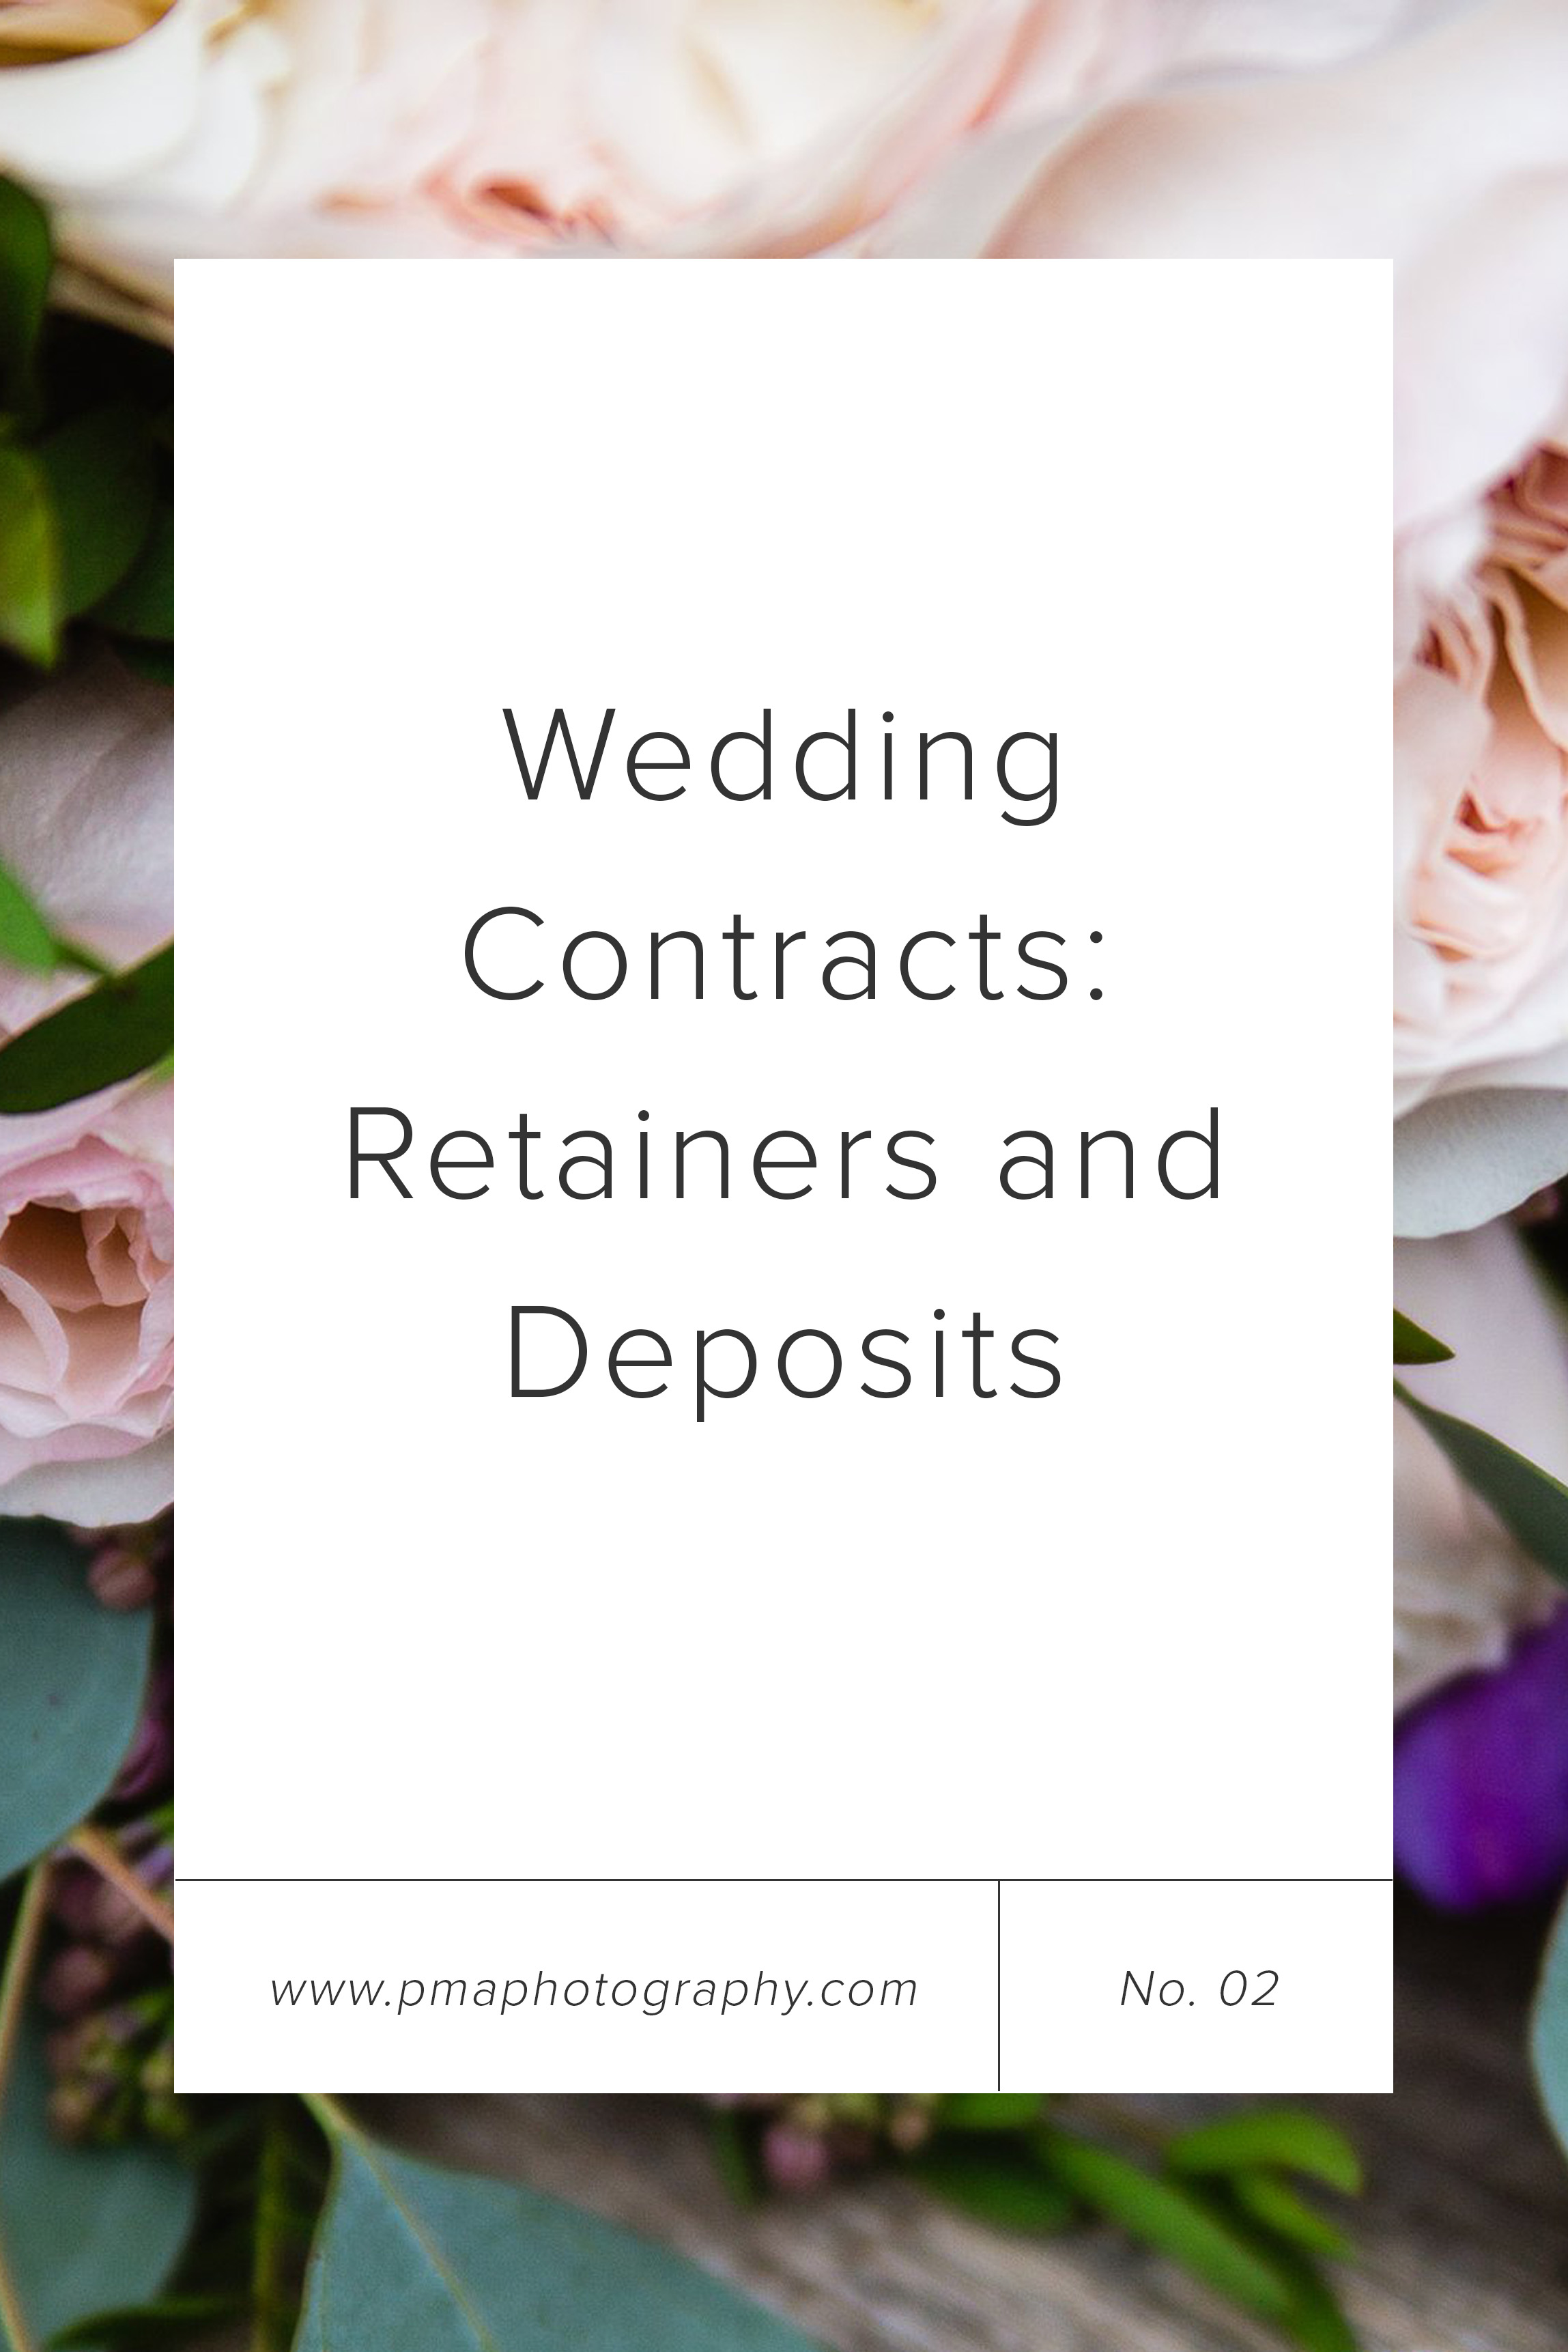 Wedding Contracts: Retainers and Deposits